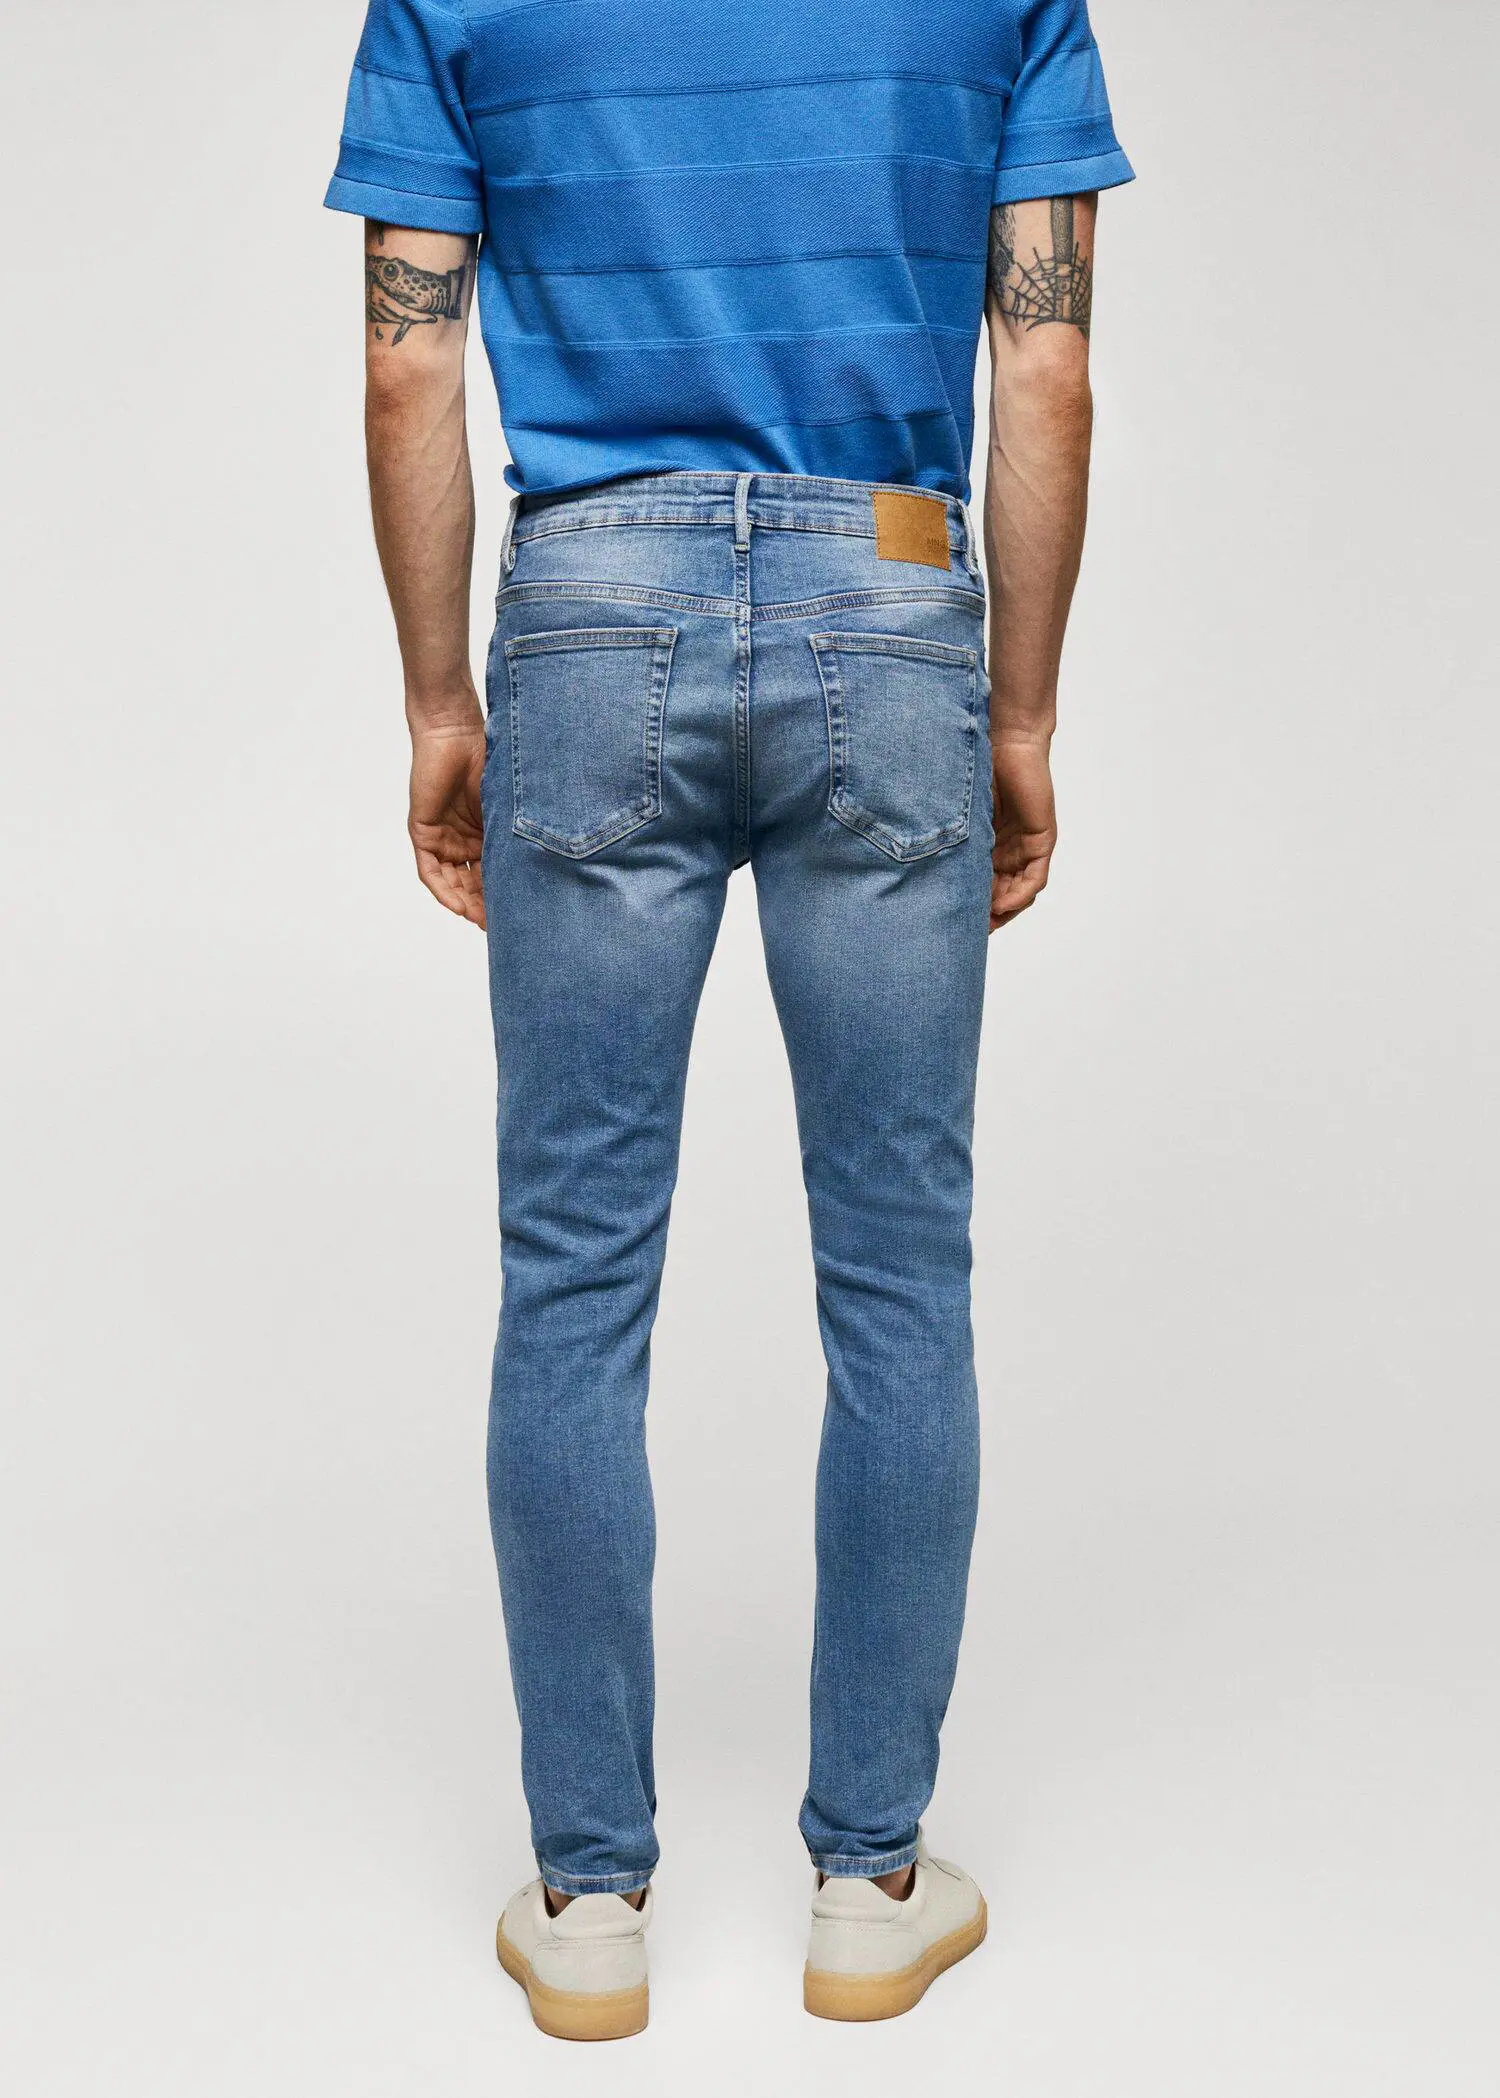 Mango Jude skinny-fit jeans. a person wearing a blue shirt and jeans. 